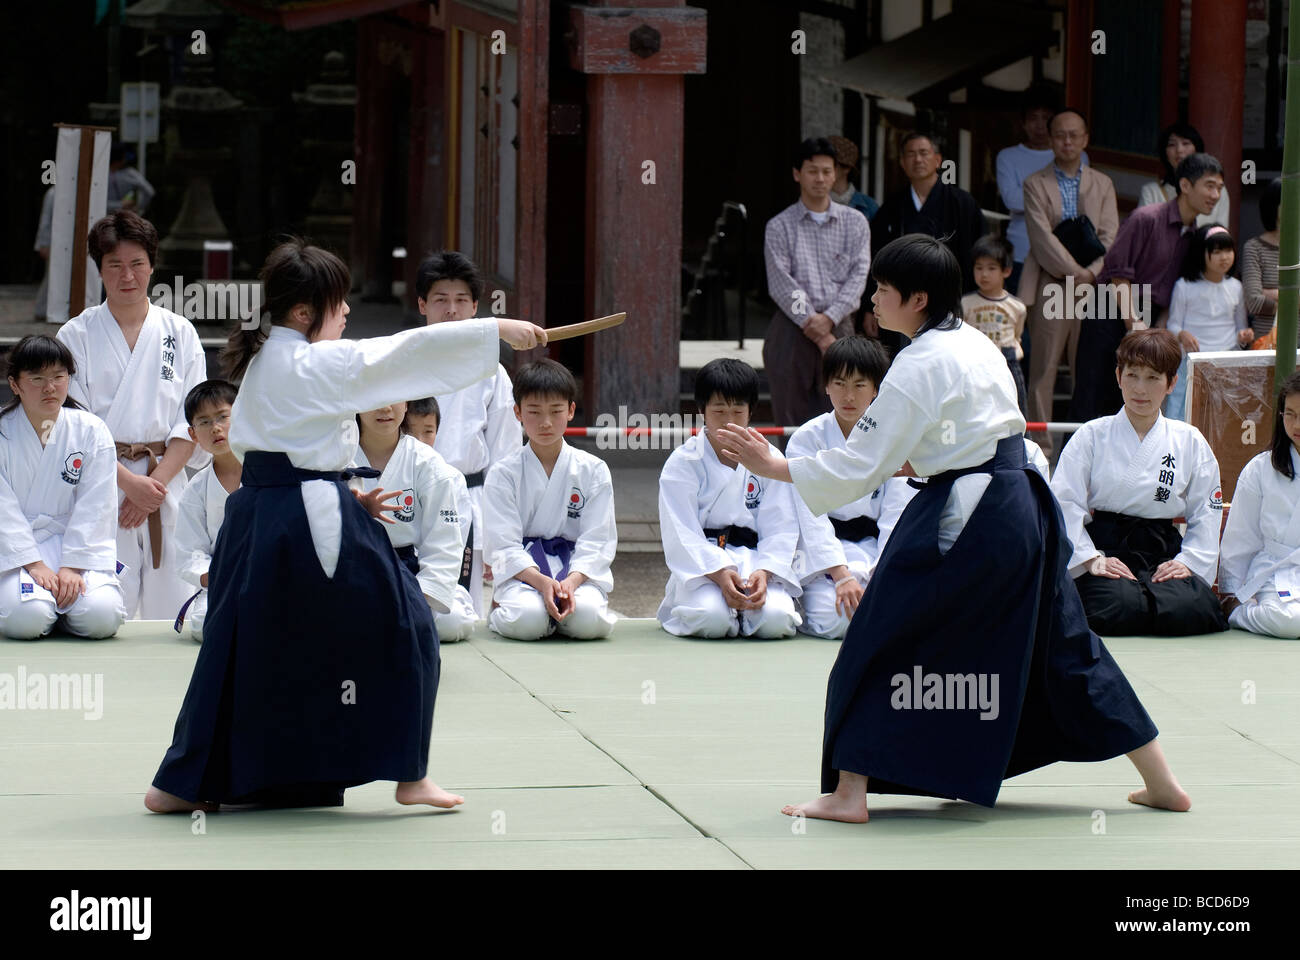 One woman with a weapon attacks her opponent during an aikido martial arts self defense demonstration in Kyoto Japan Stock Photo